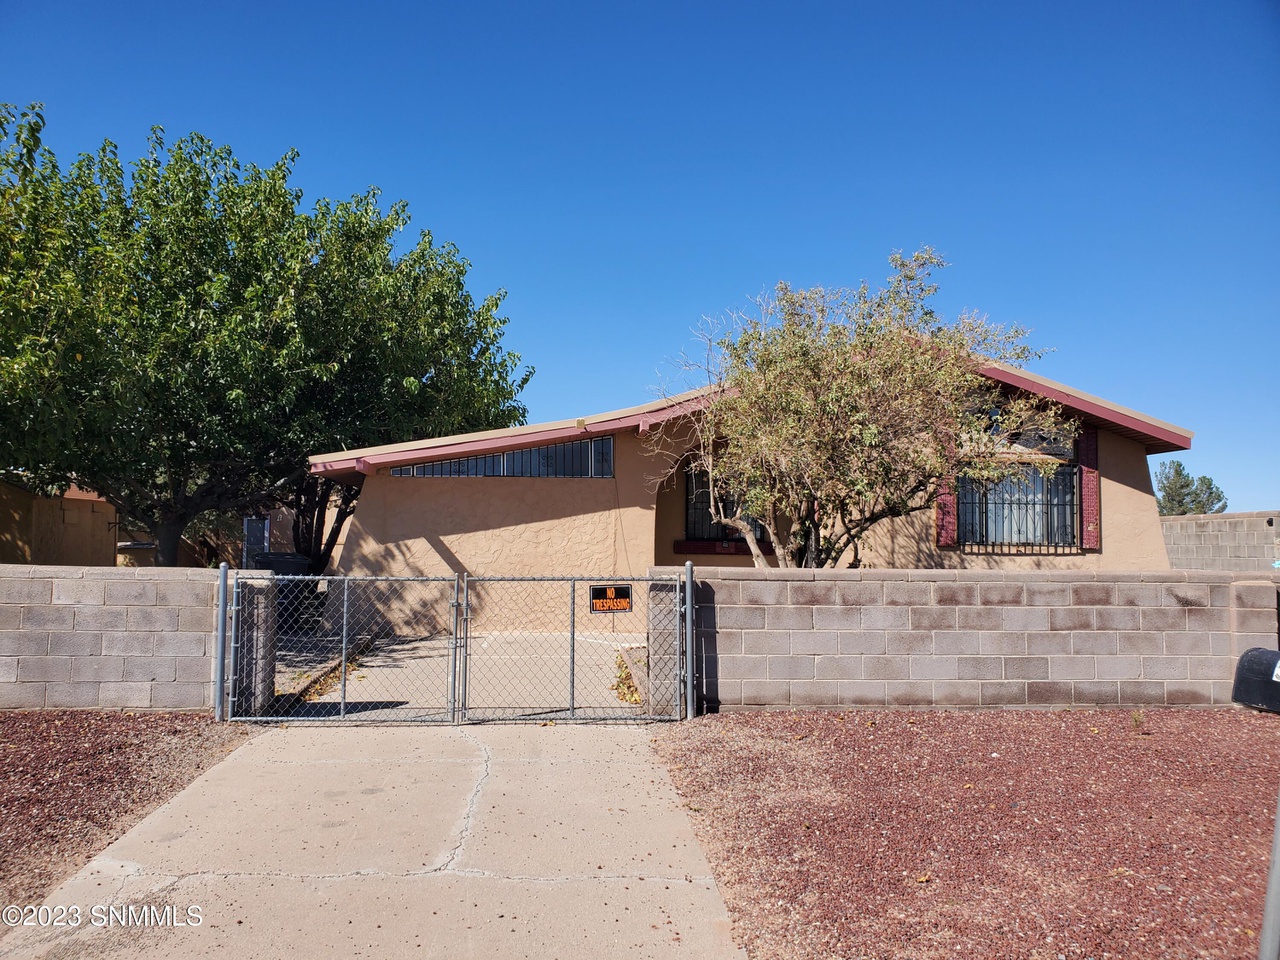 501 Sunday Dr, Deming, NM 88030